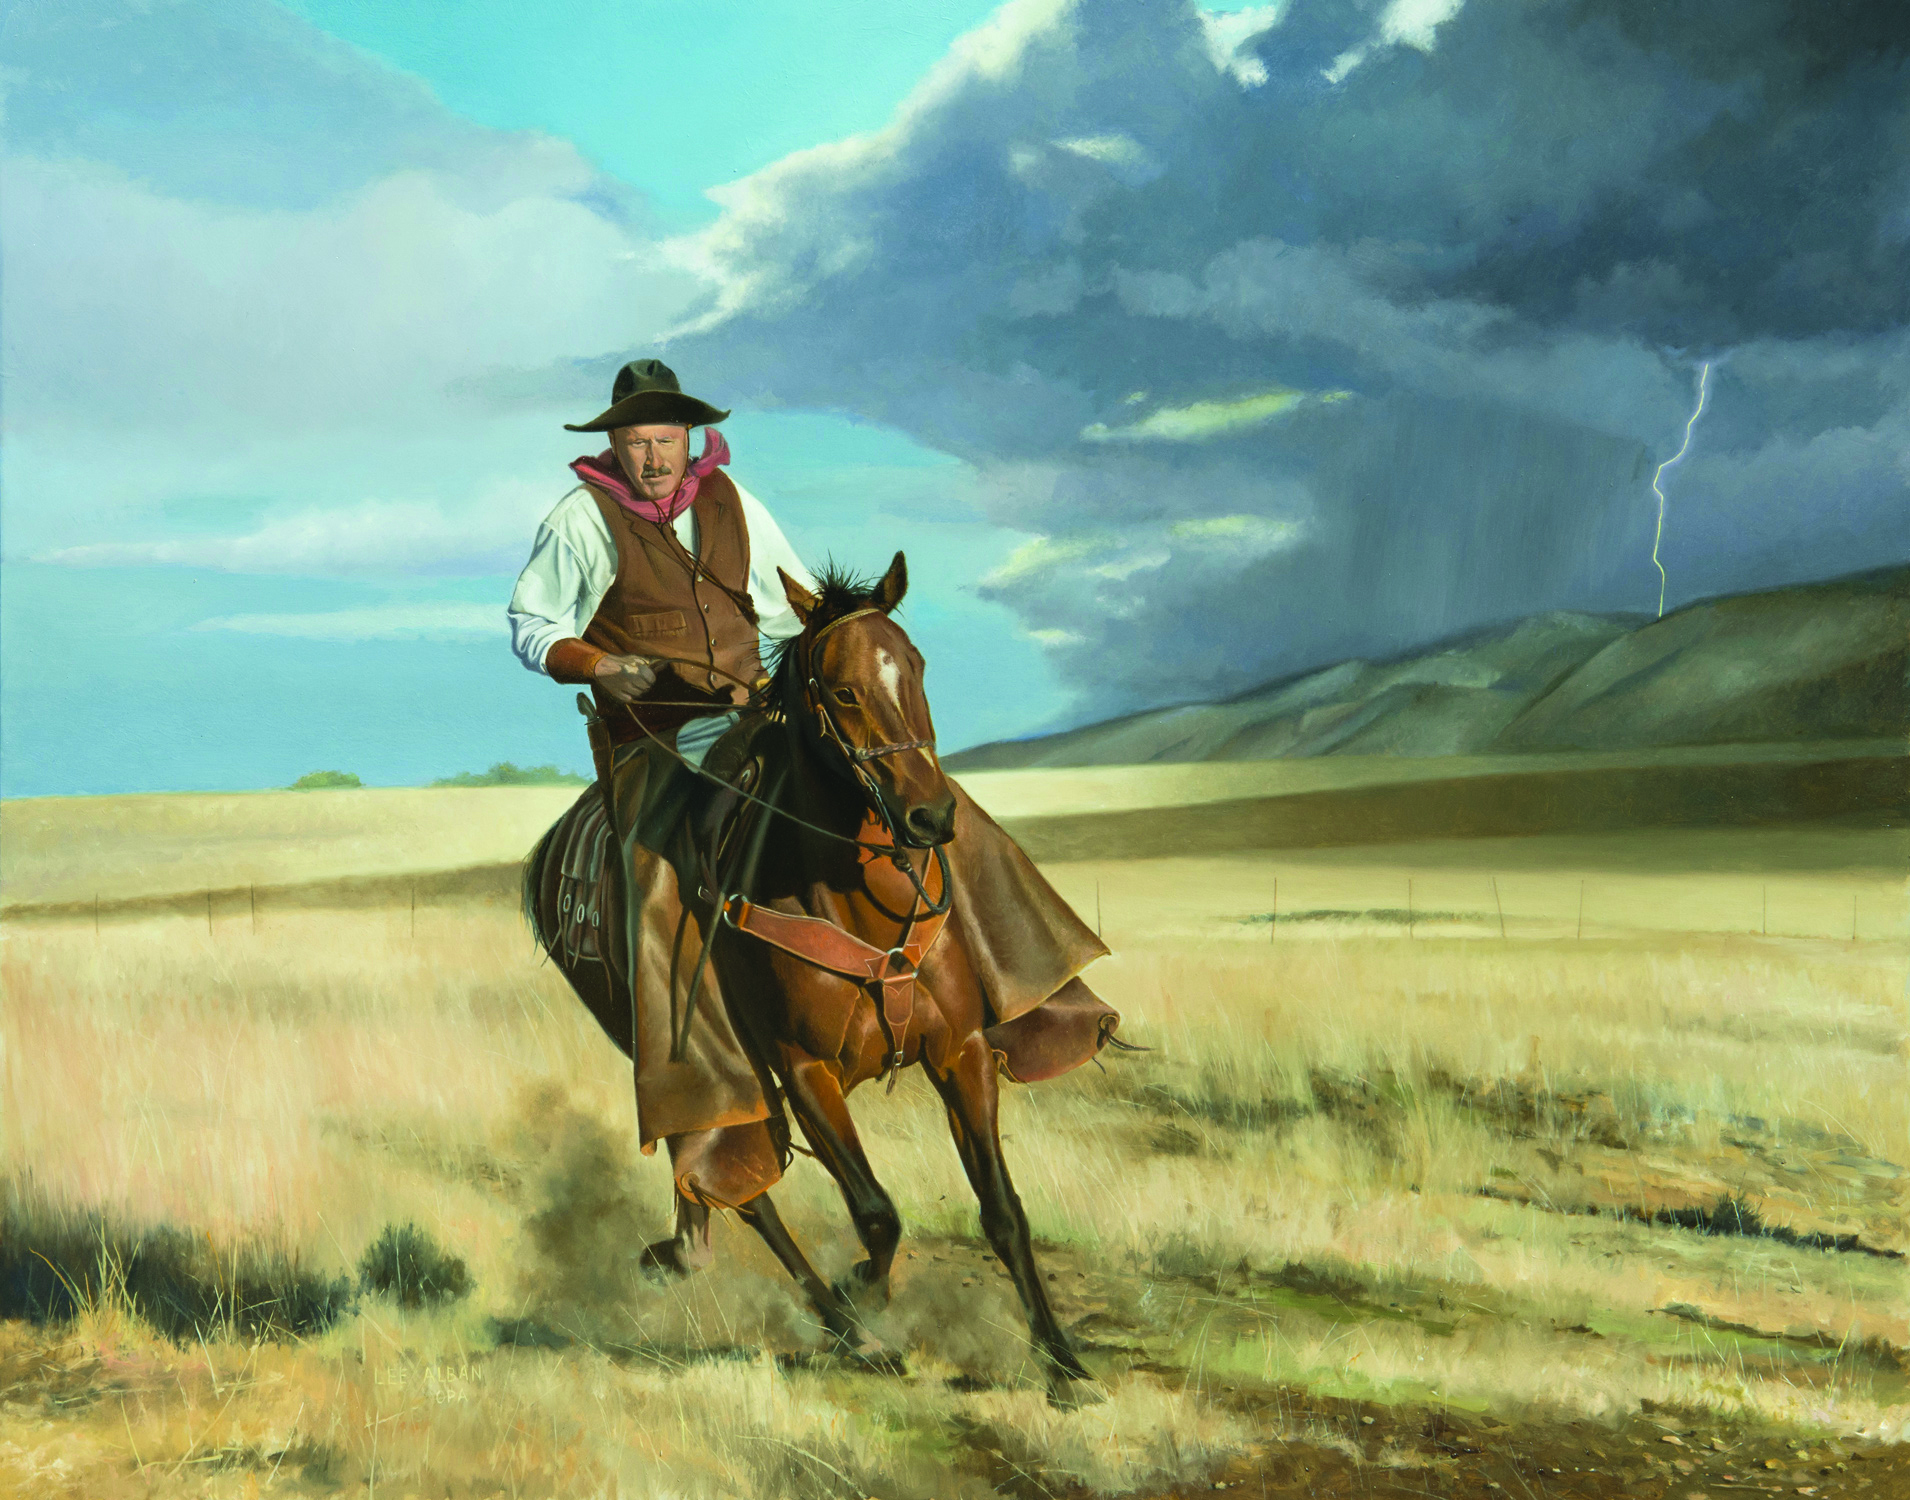 Paintings of horses - Lee Alban (b. 1948), "Ahead of the Storm," 2019, oil on panel, 24 x 30 in., available from the artist